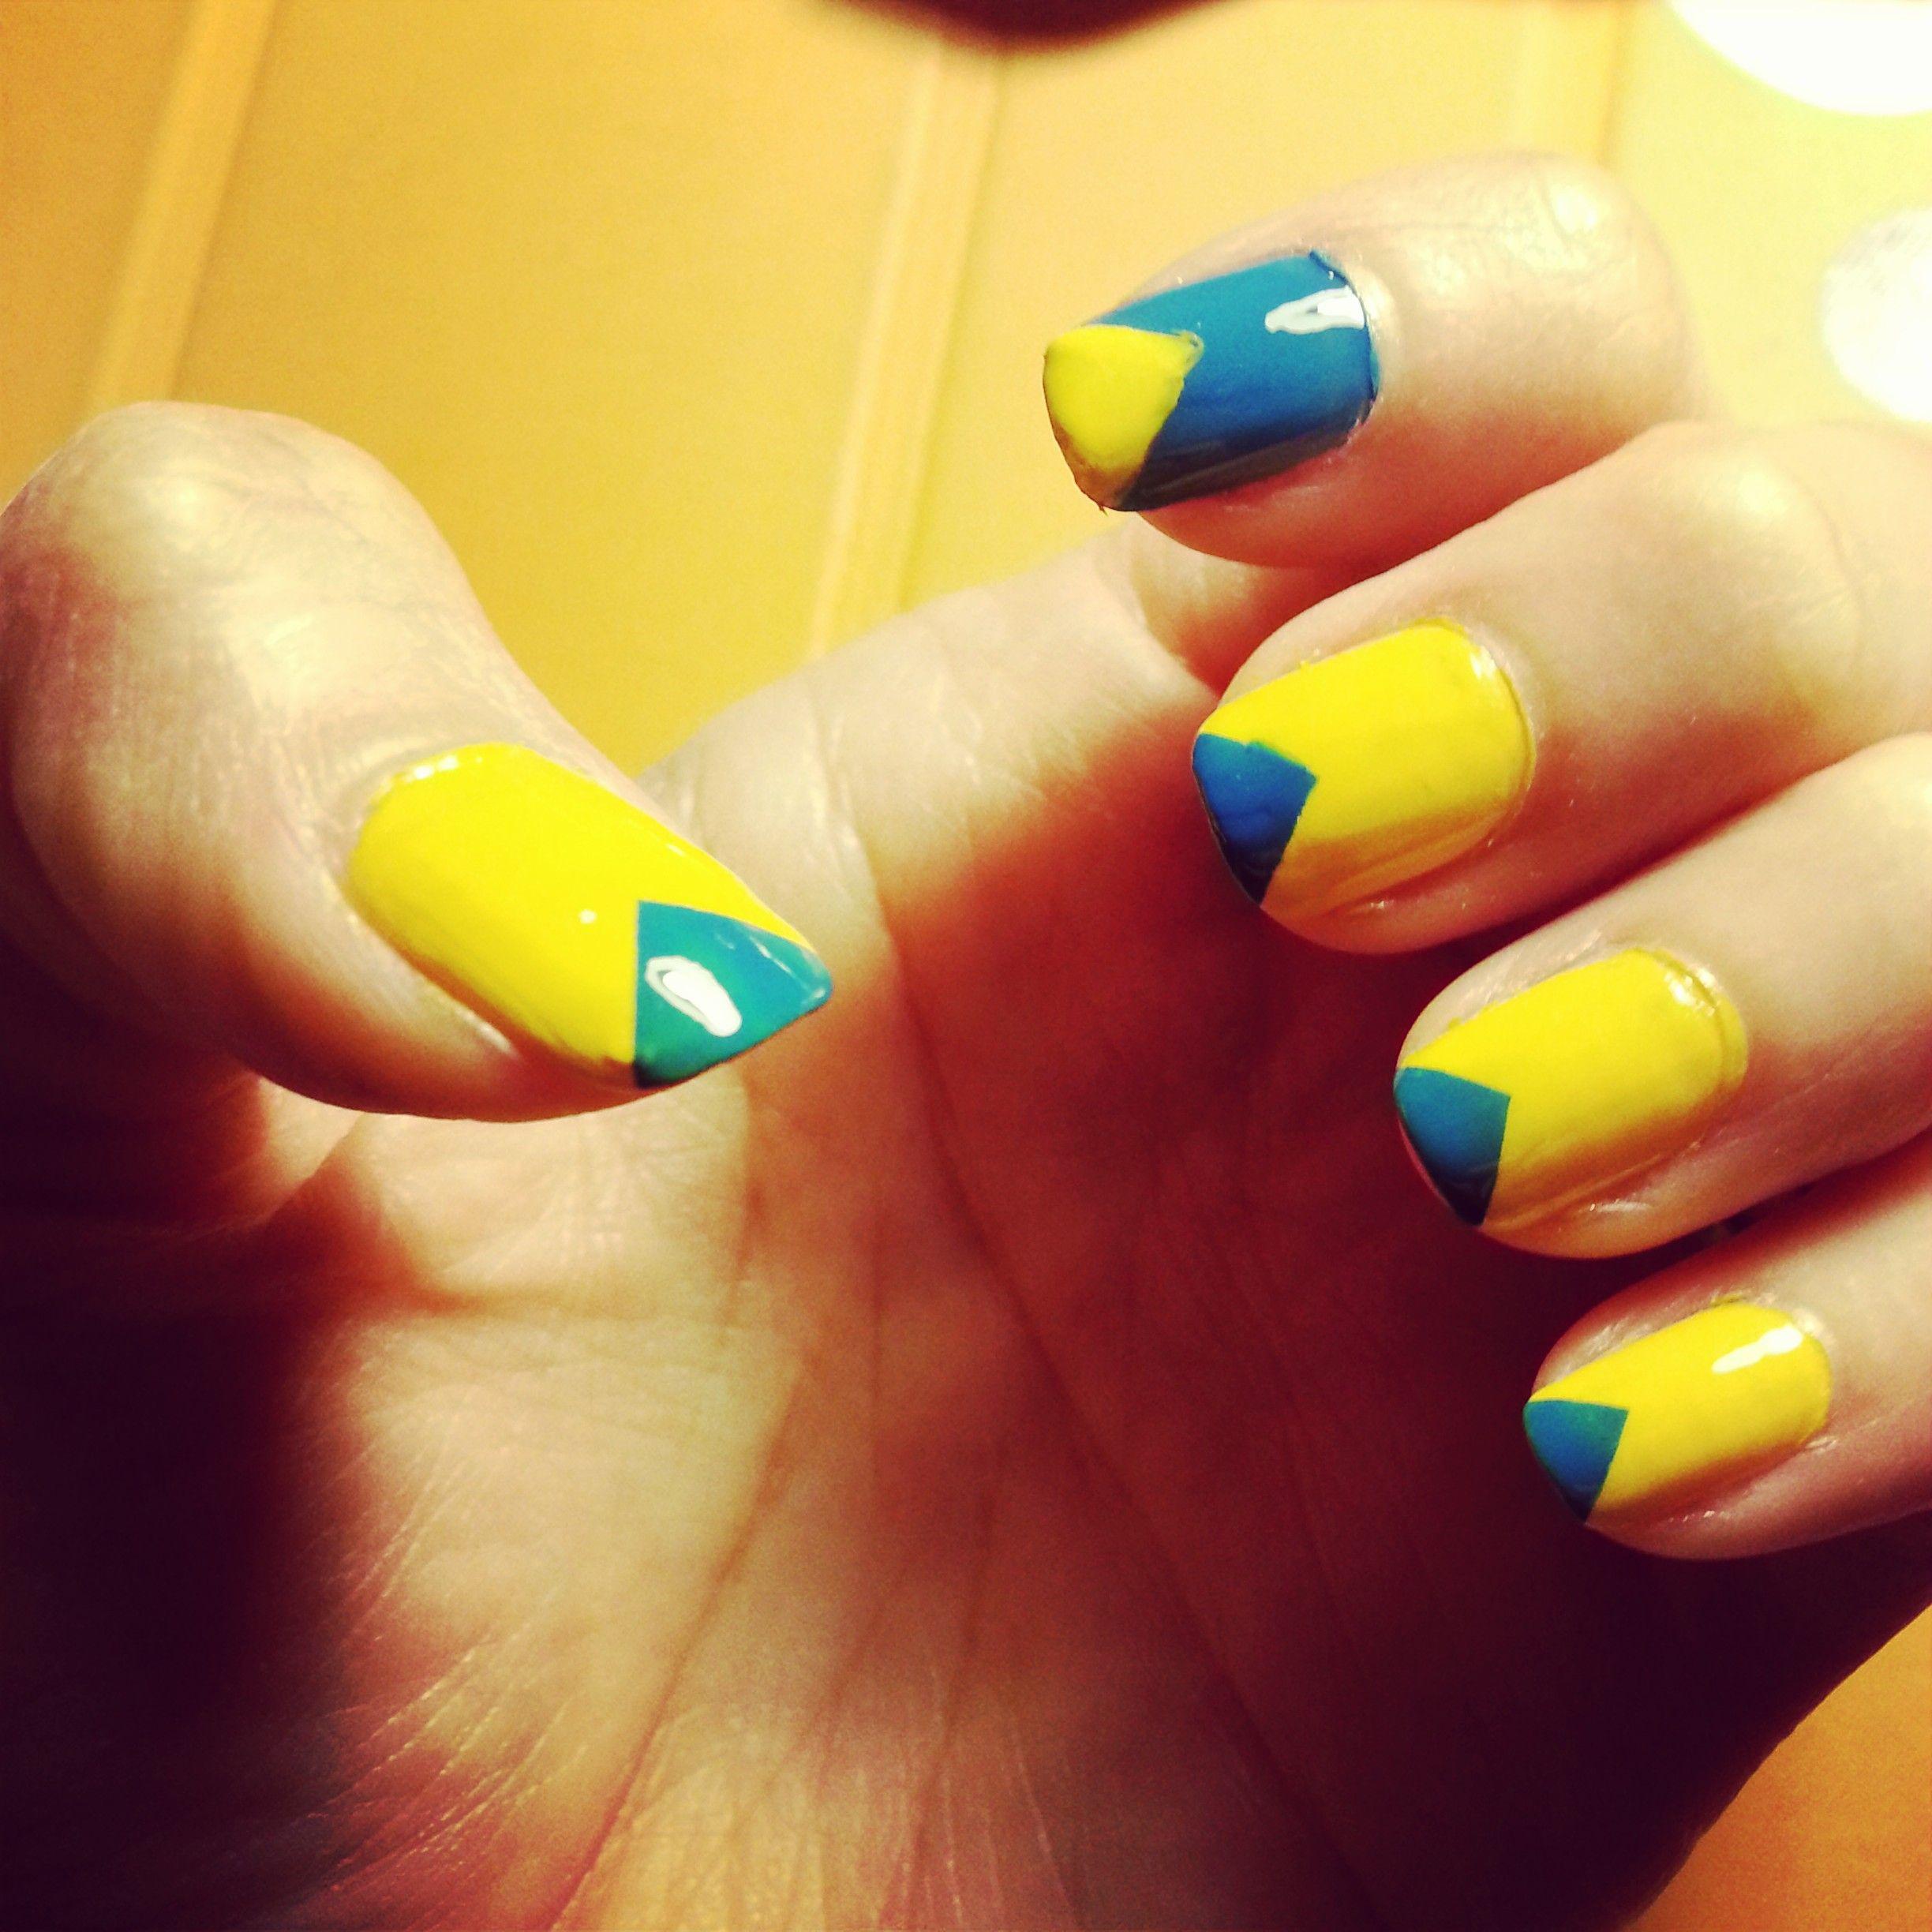 Blue and Yellow Triangle Logo - Simple Blue & Yellow Triangle Nail Art Tutorial. munkie VS the world